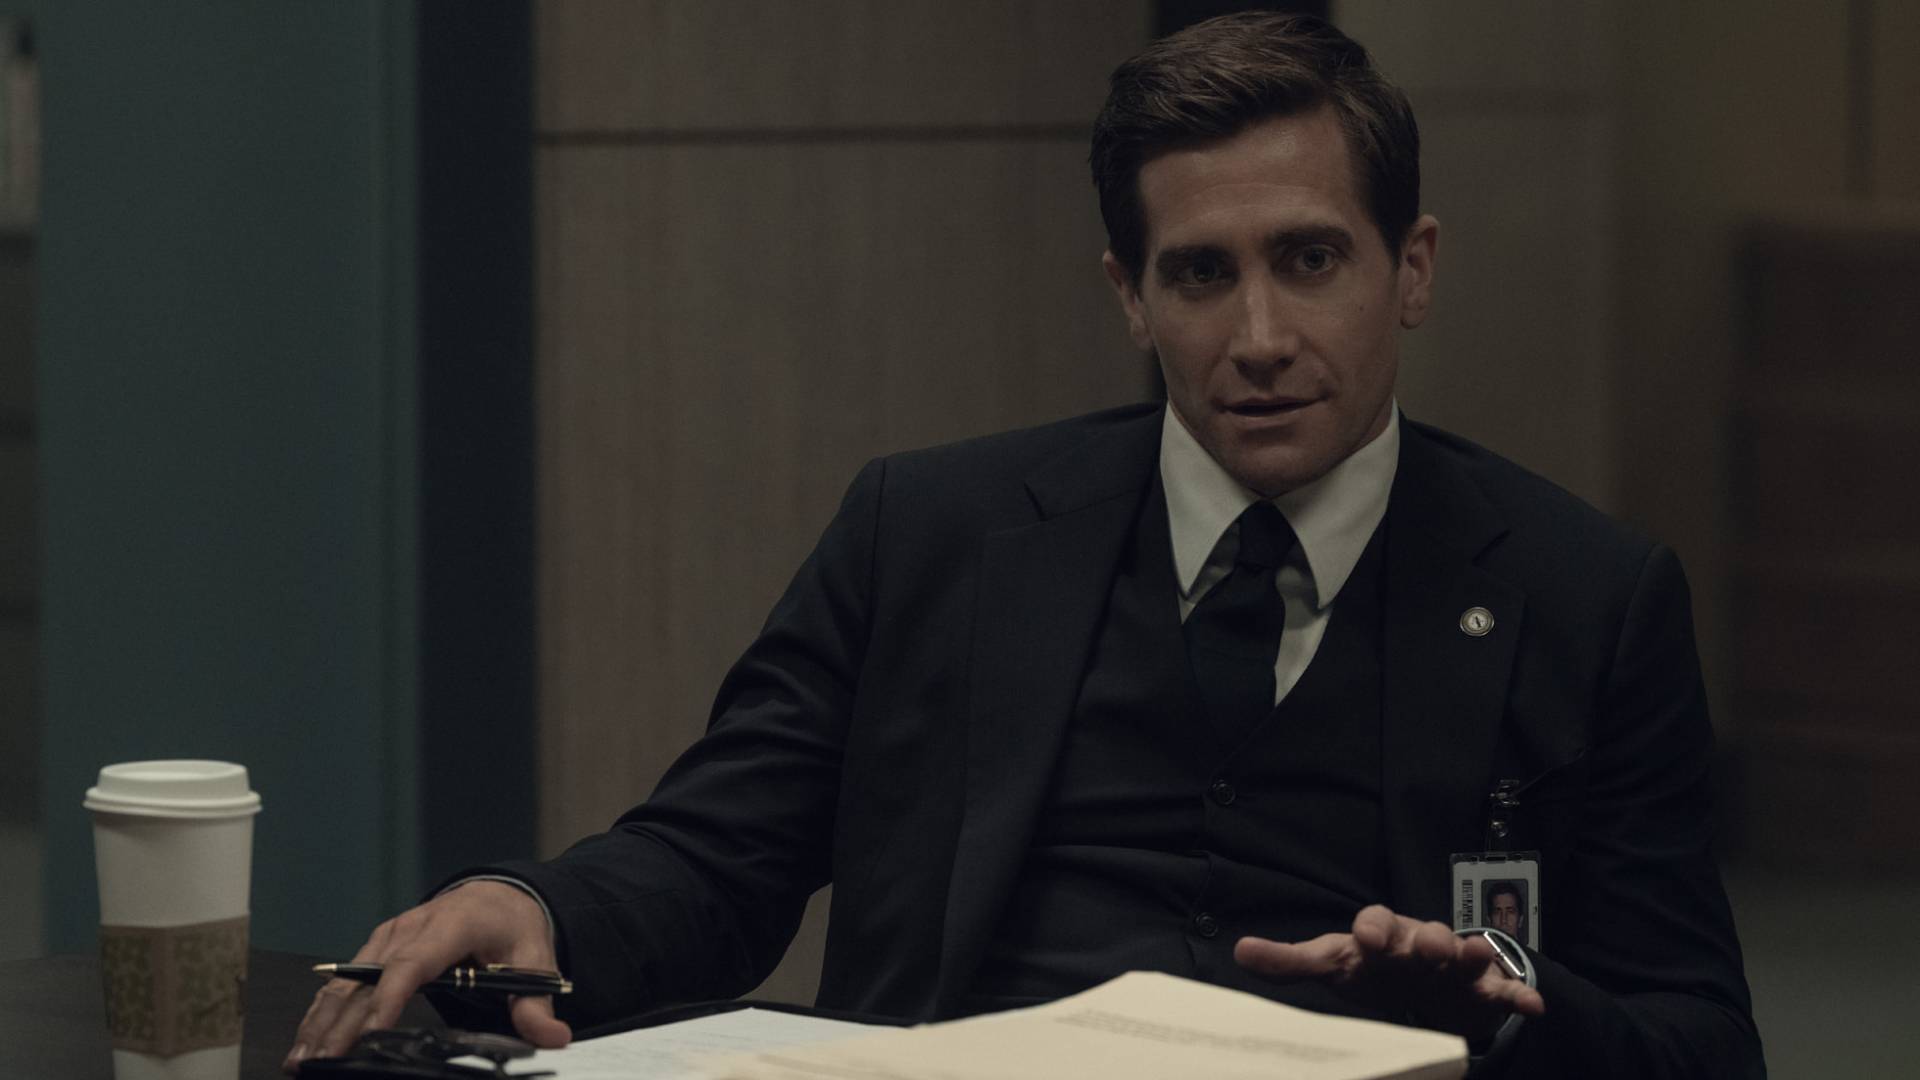 Jake Gyllenhaal stars as an accused killer in first trailer for crime drama in step with identical e book as Harrison Ford thriller